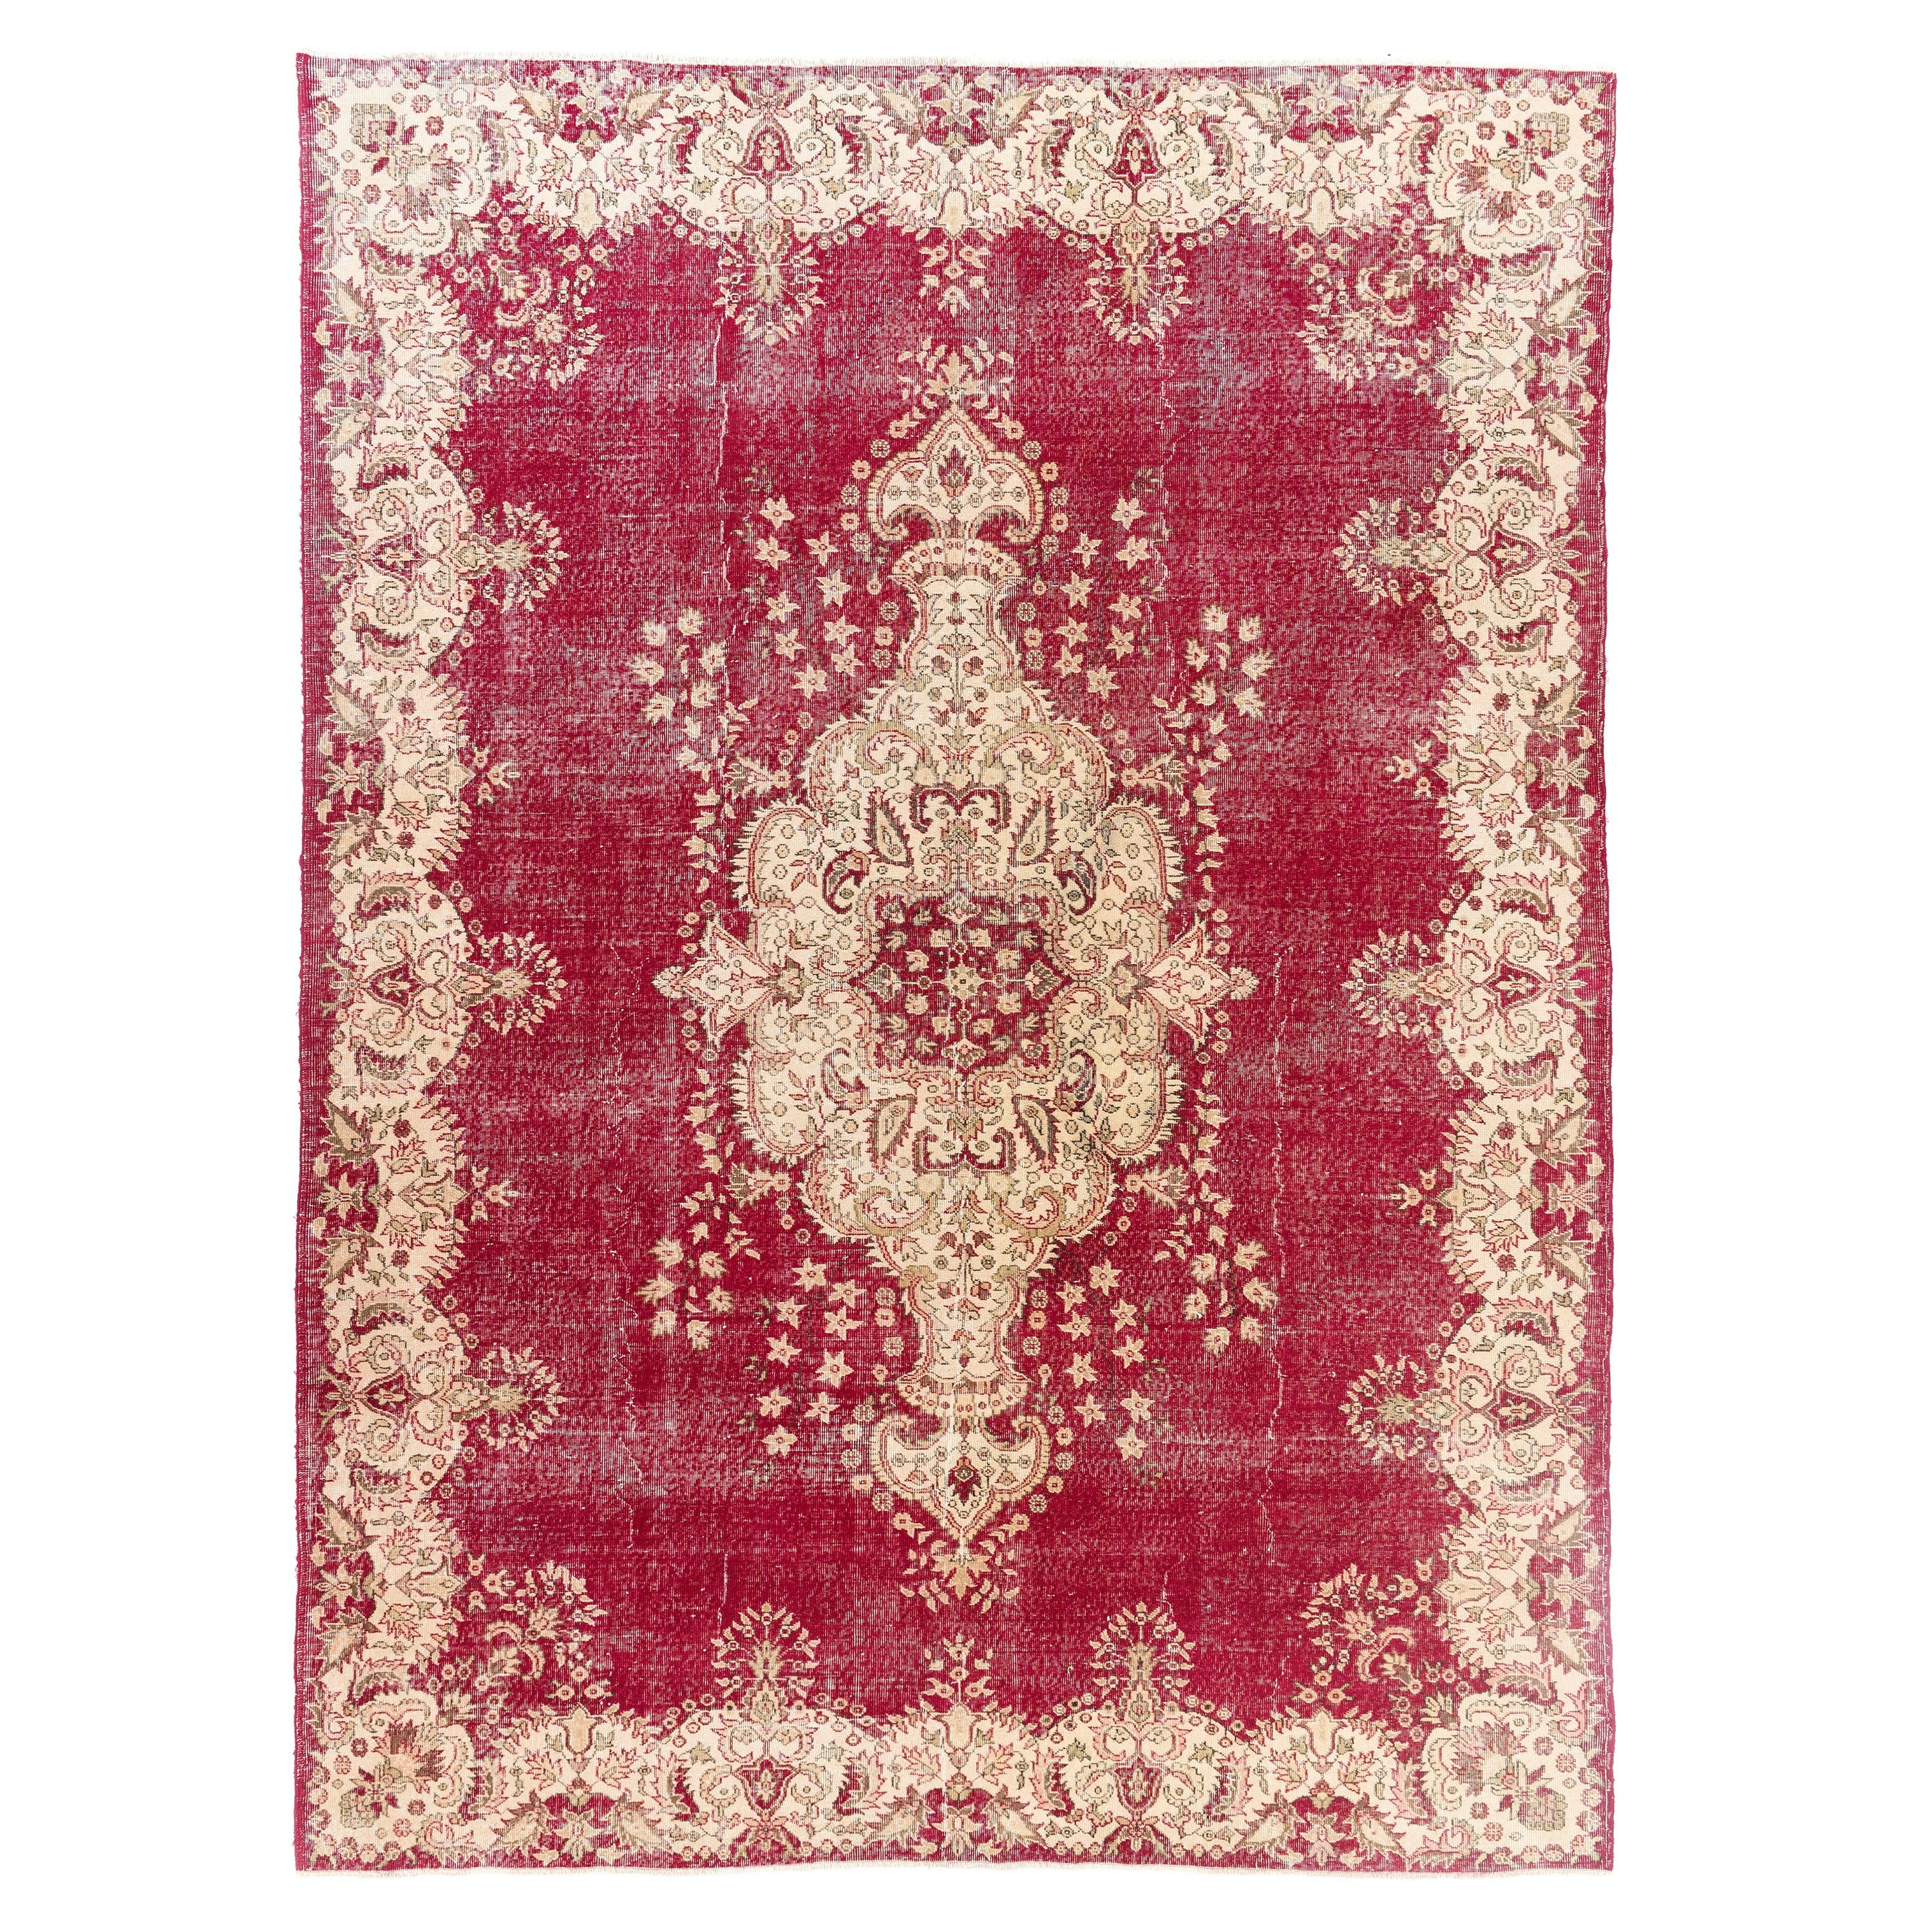 9x12.3 Ft Vintage Oriental Carpet. Traditional Turkish Wool Rug in Red and Beige For Sale